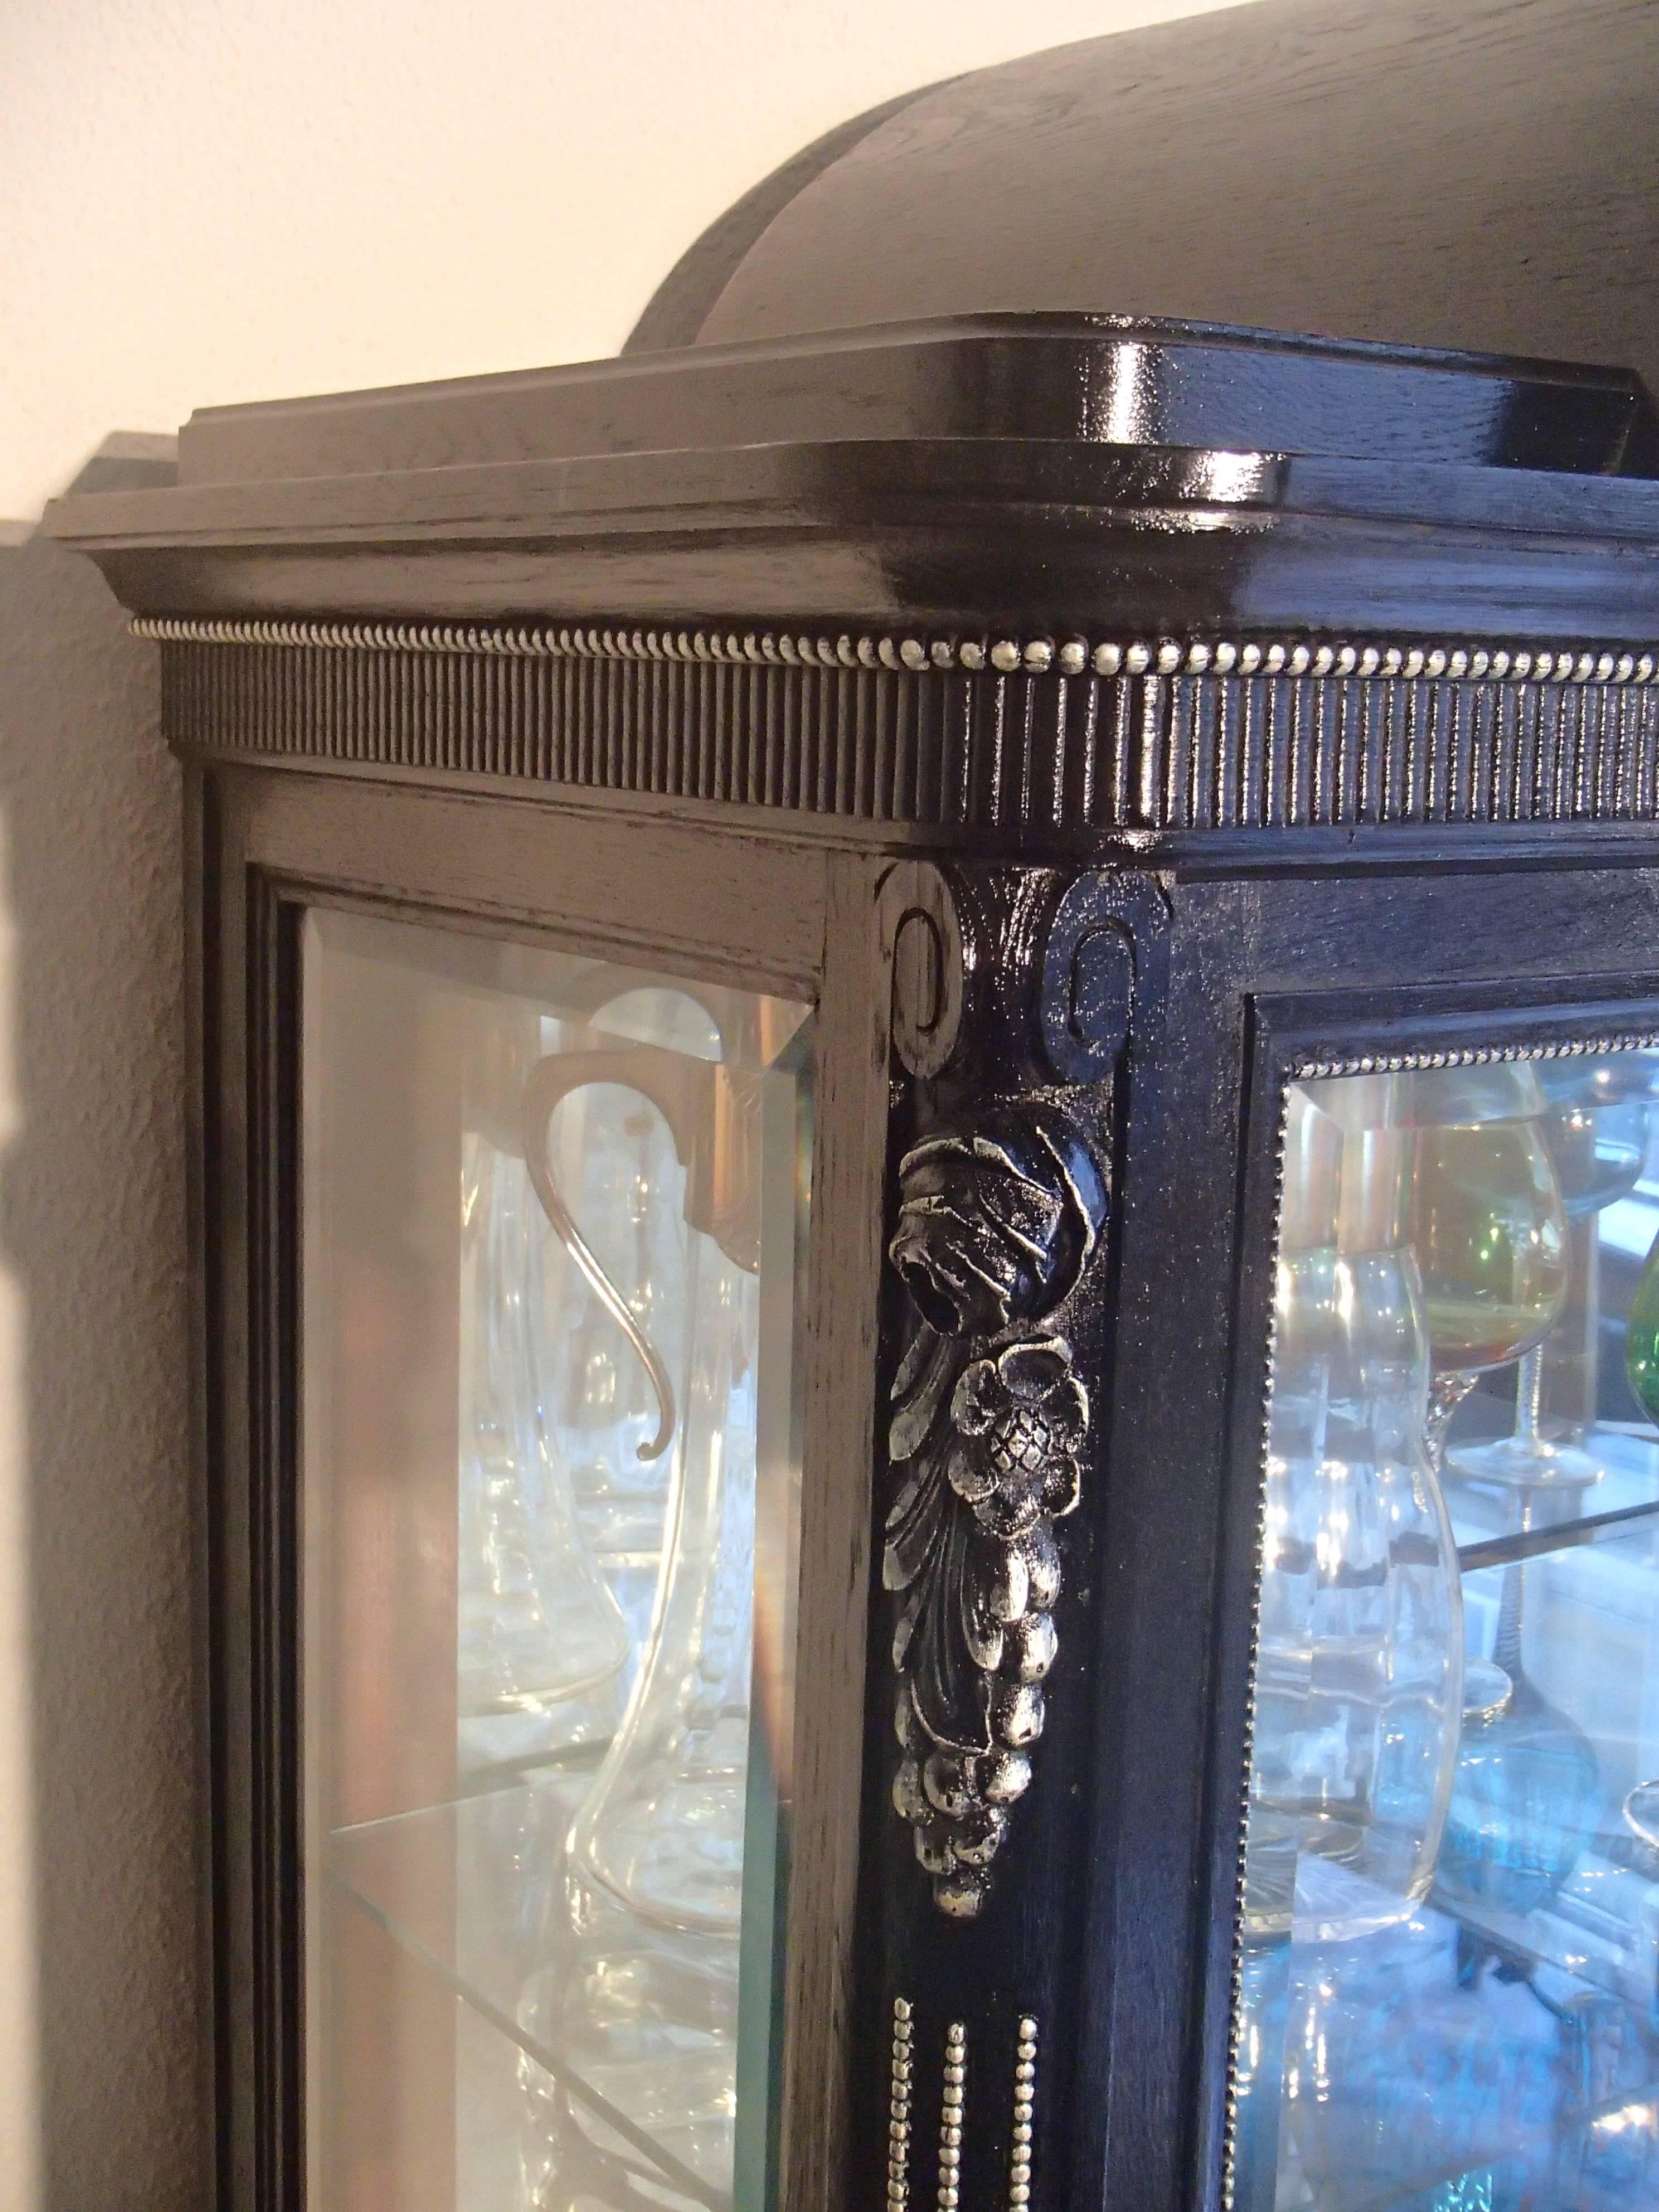 Late 19th Century 1880s Black Oak Cabinet with Carved Ornaments Original Silver Chrome Mirror For Sale